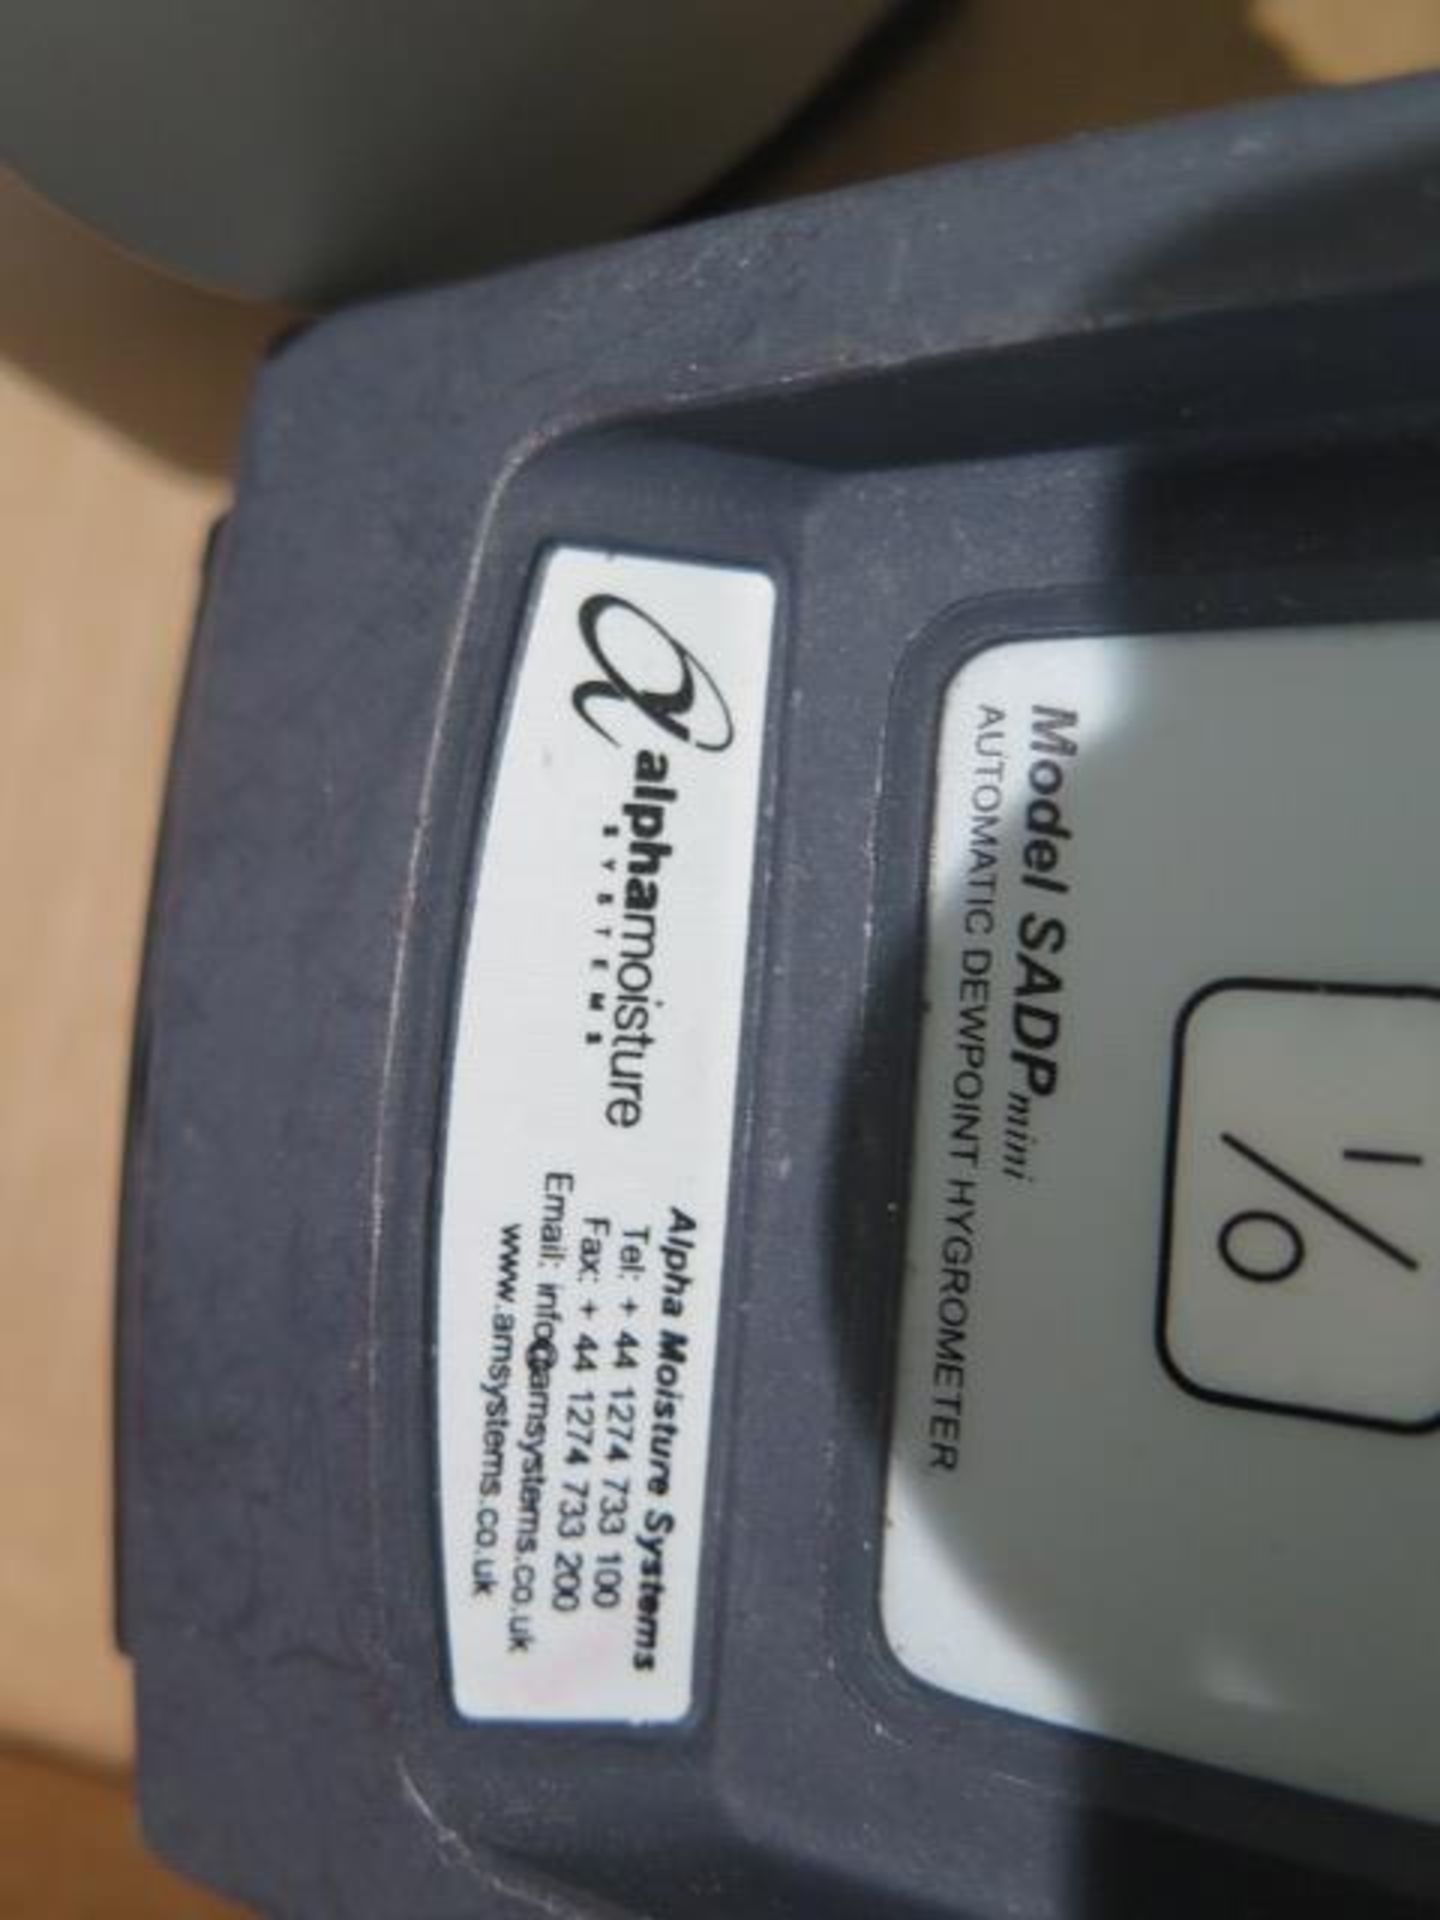 Alpha Moisture Systems mdl. SADP mini Automatoc Dewpoint Hygrometers (3) (SOLD AS-IS - NO WARRANTY) - Image 8 of 8